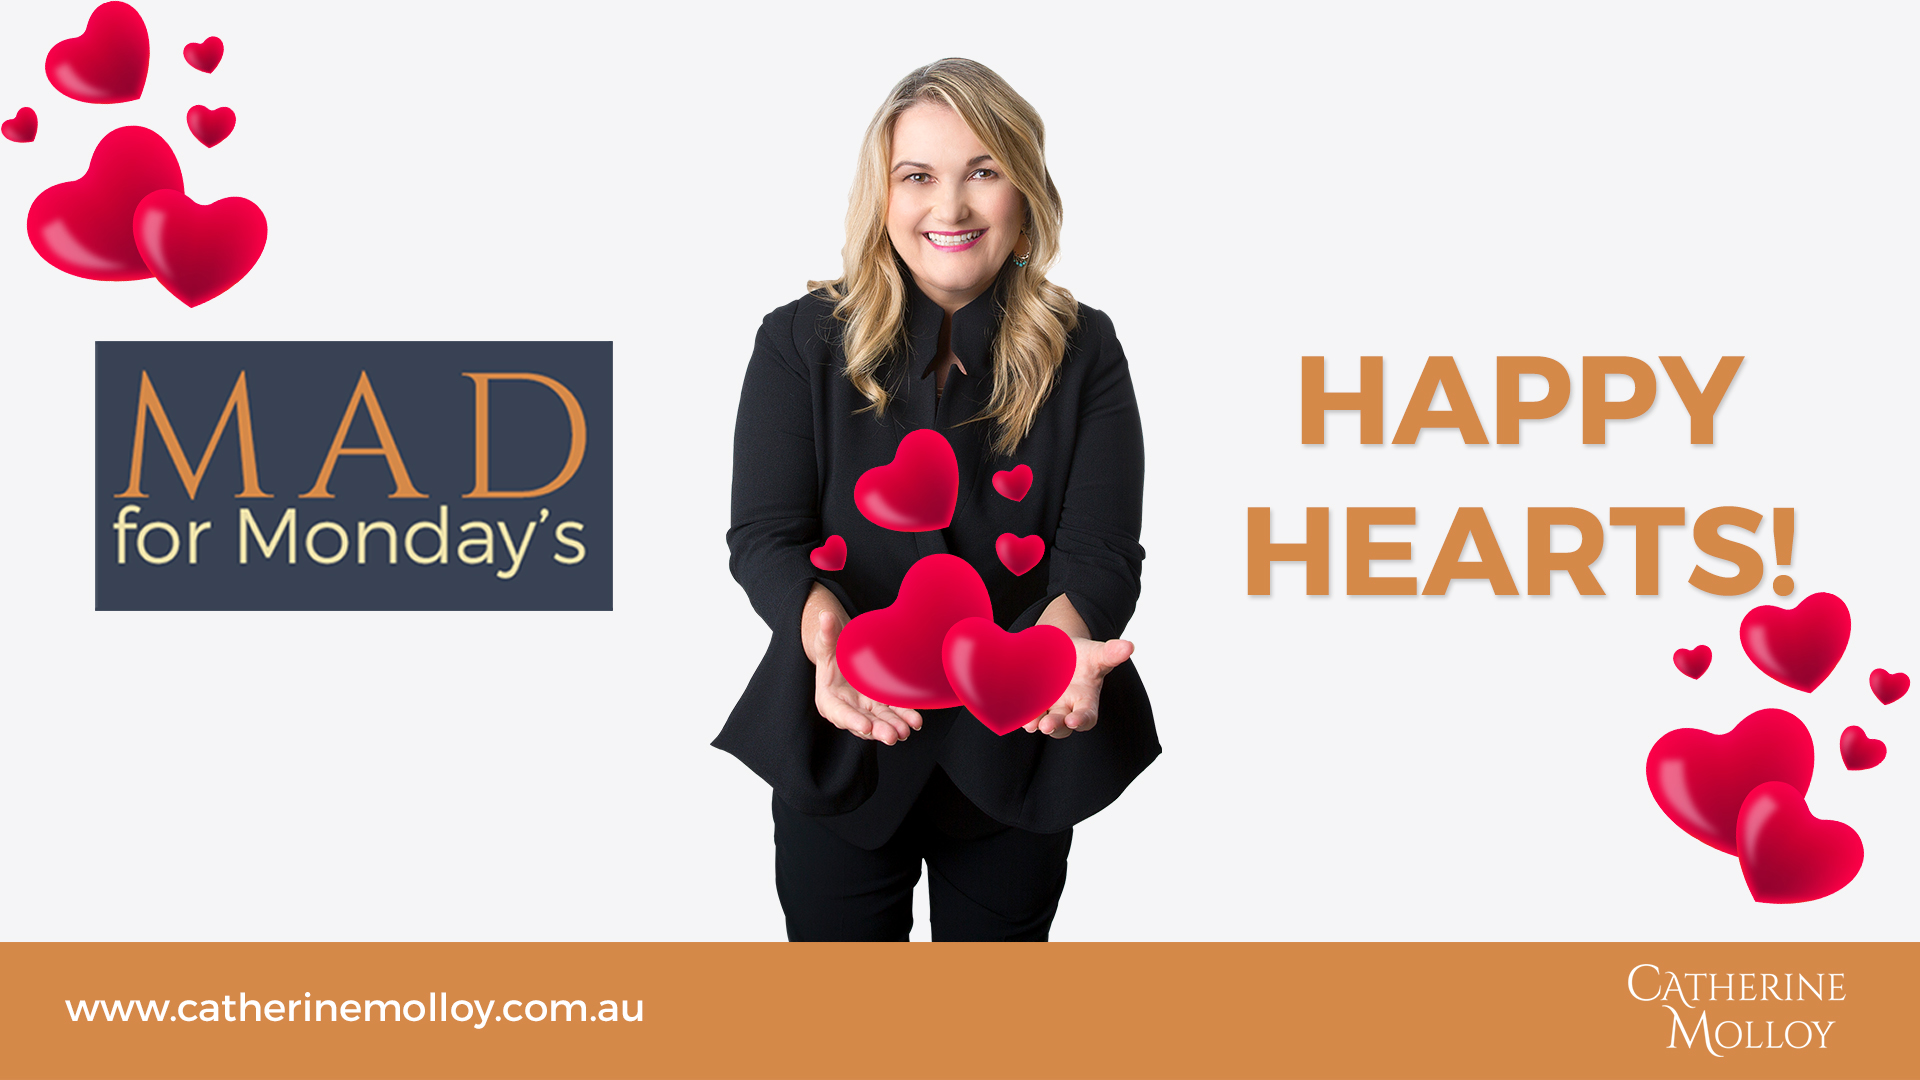 MAD for Monday’s – Happy Hearts